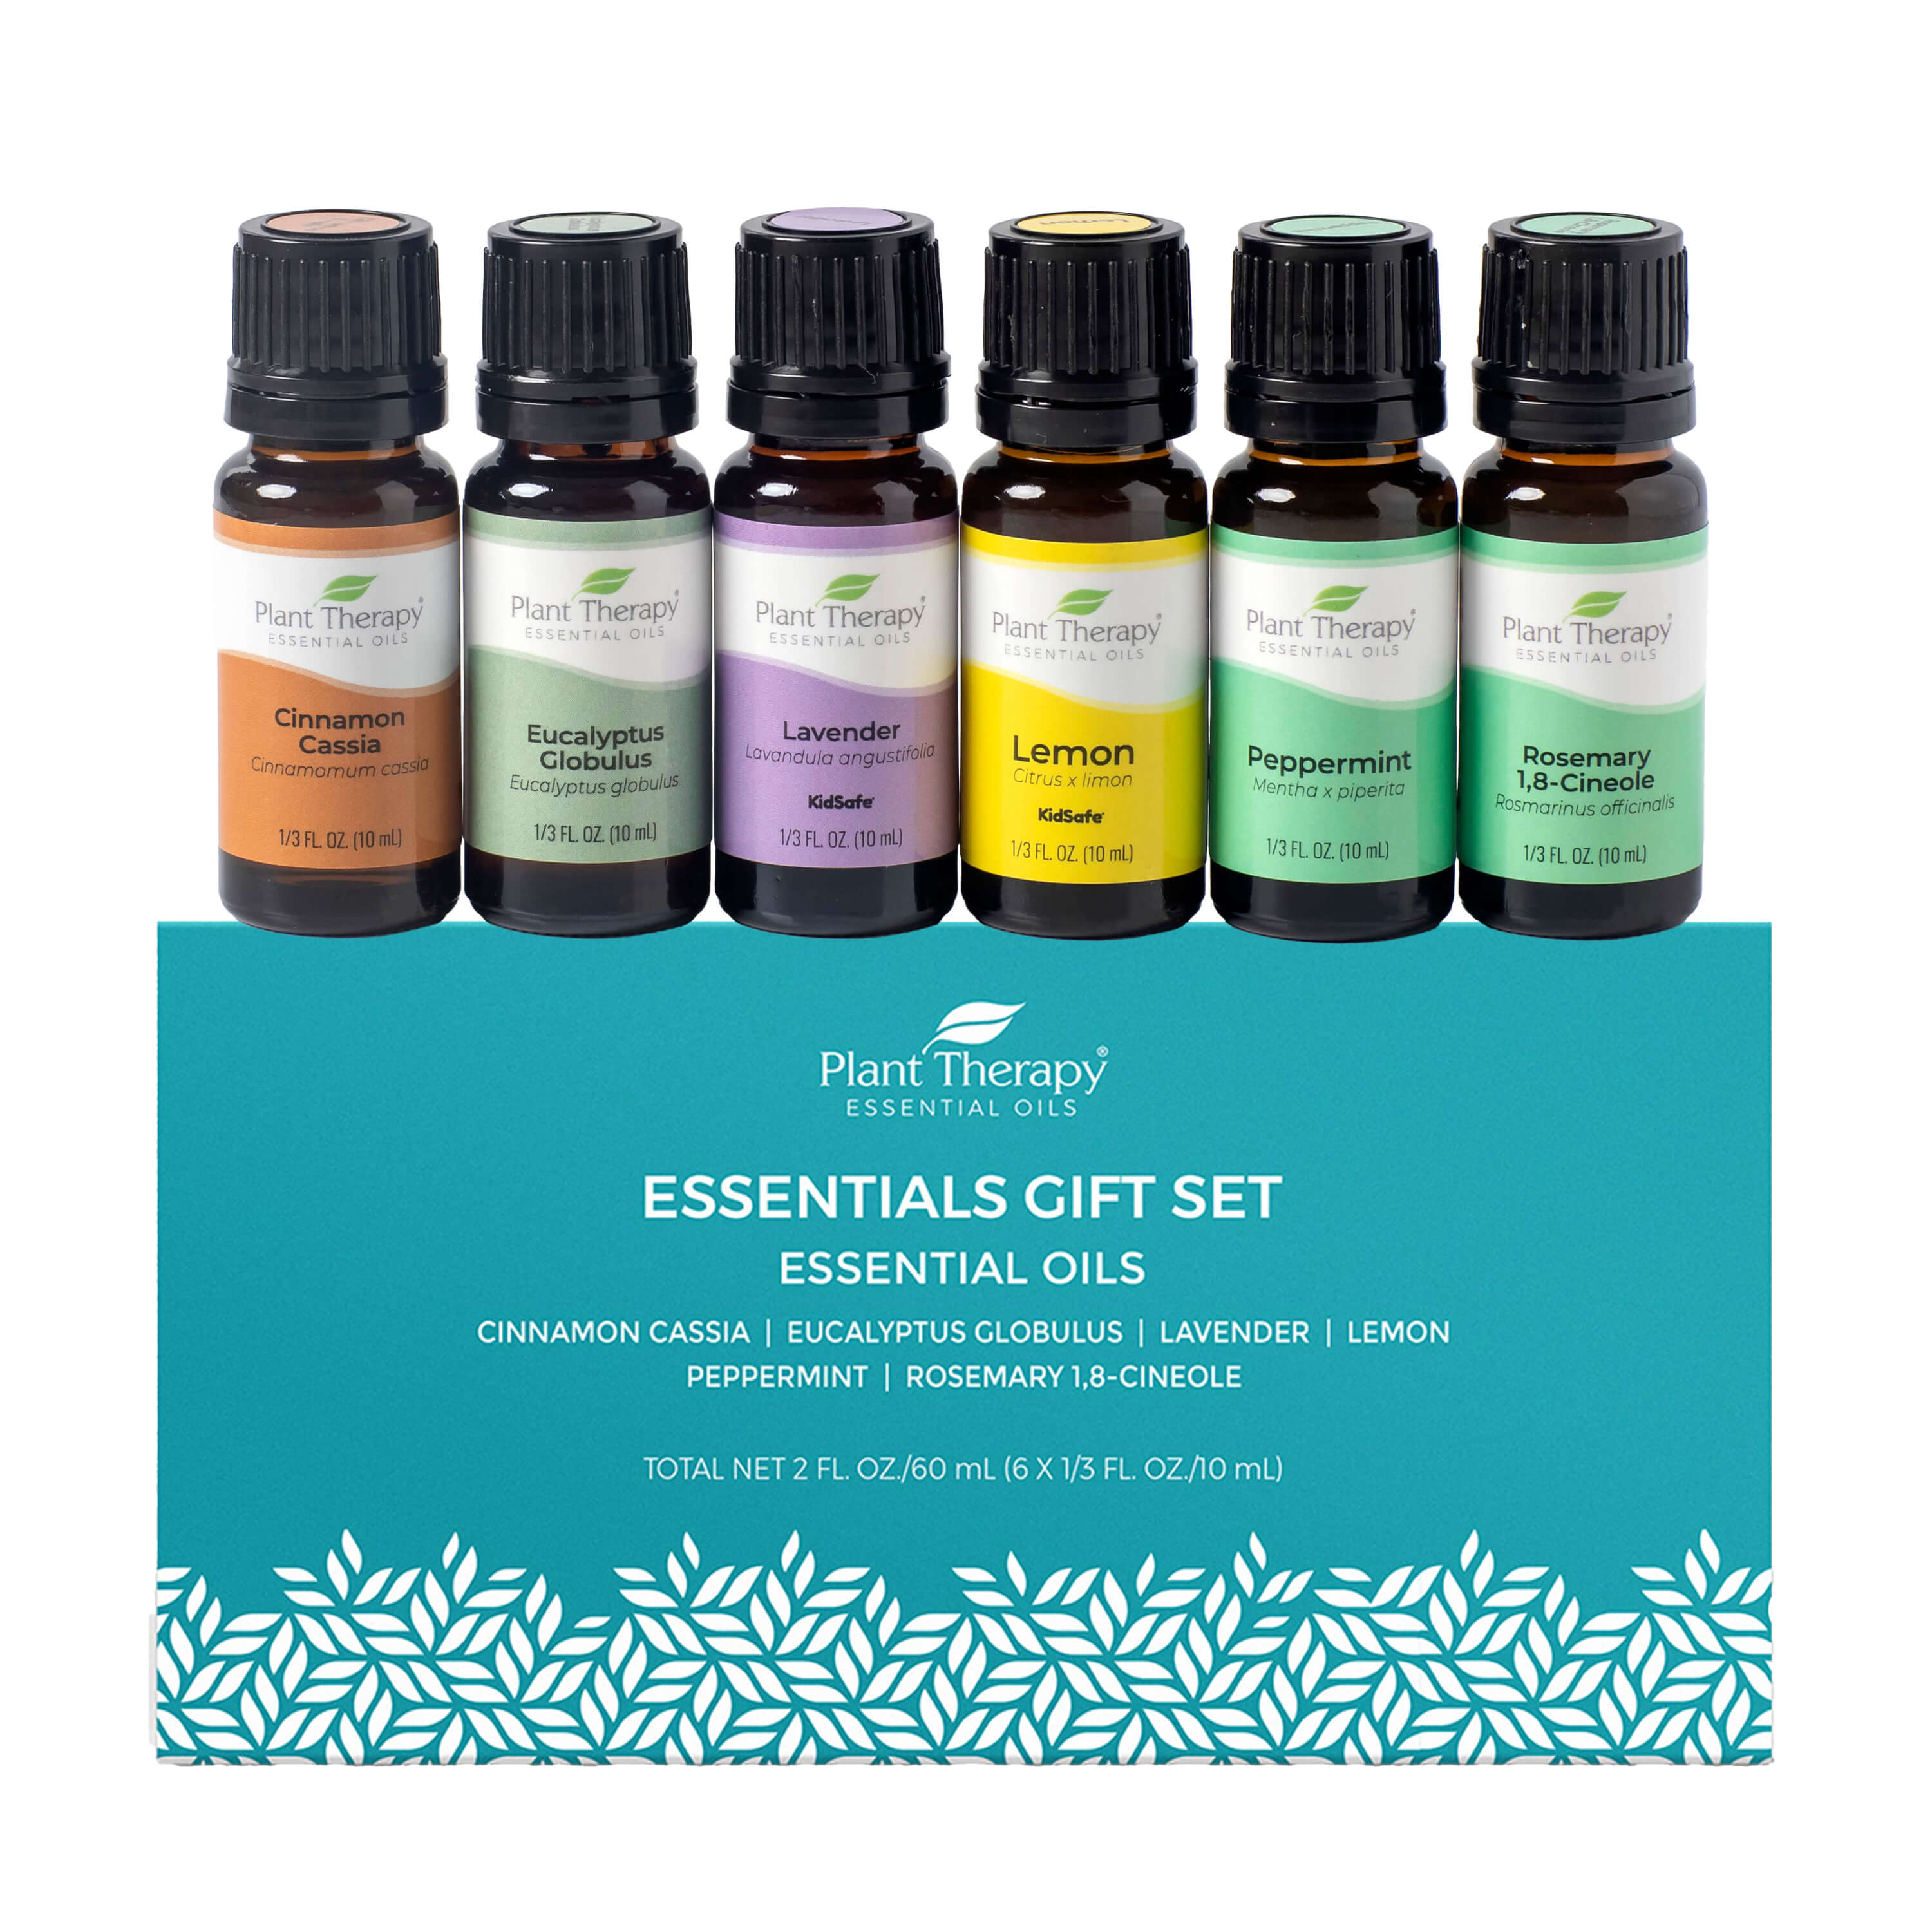 Just the Essentials Body Care Set – Plant Therapy